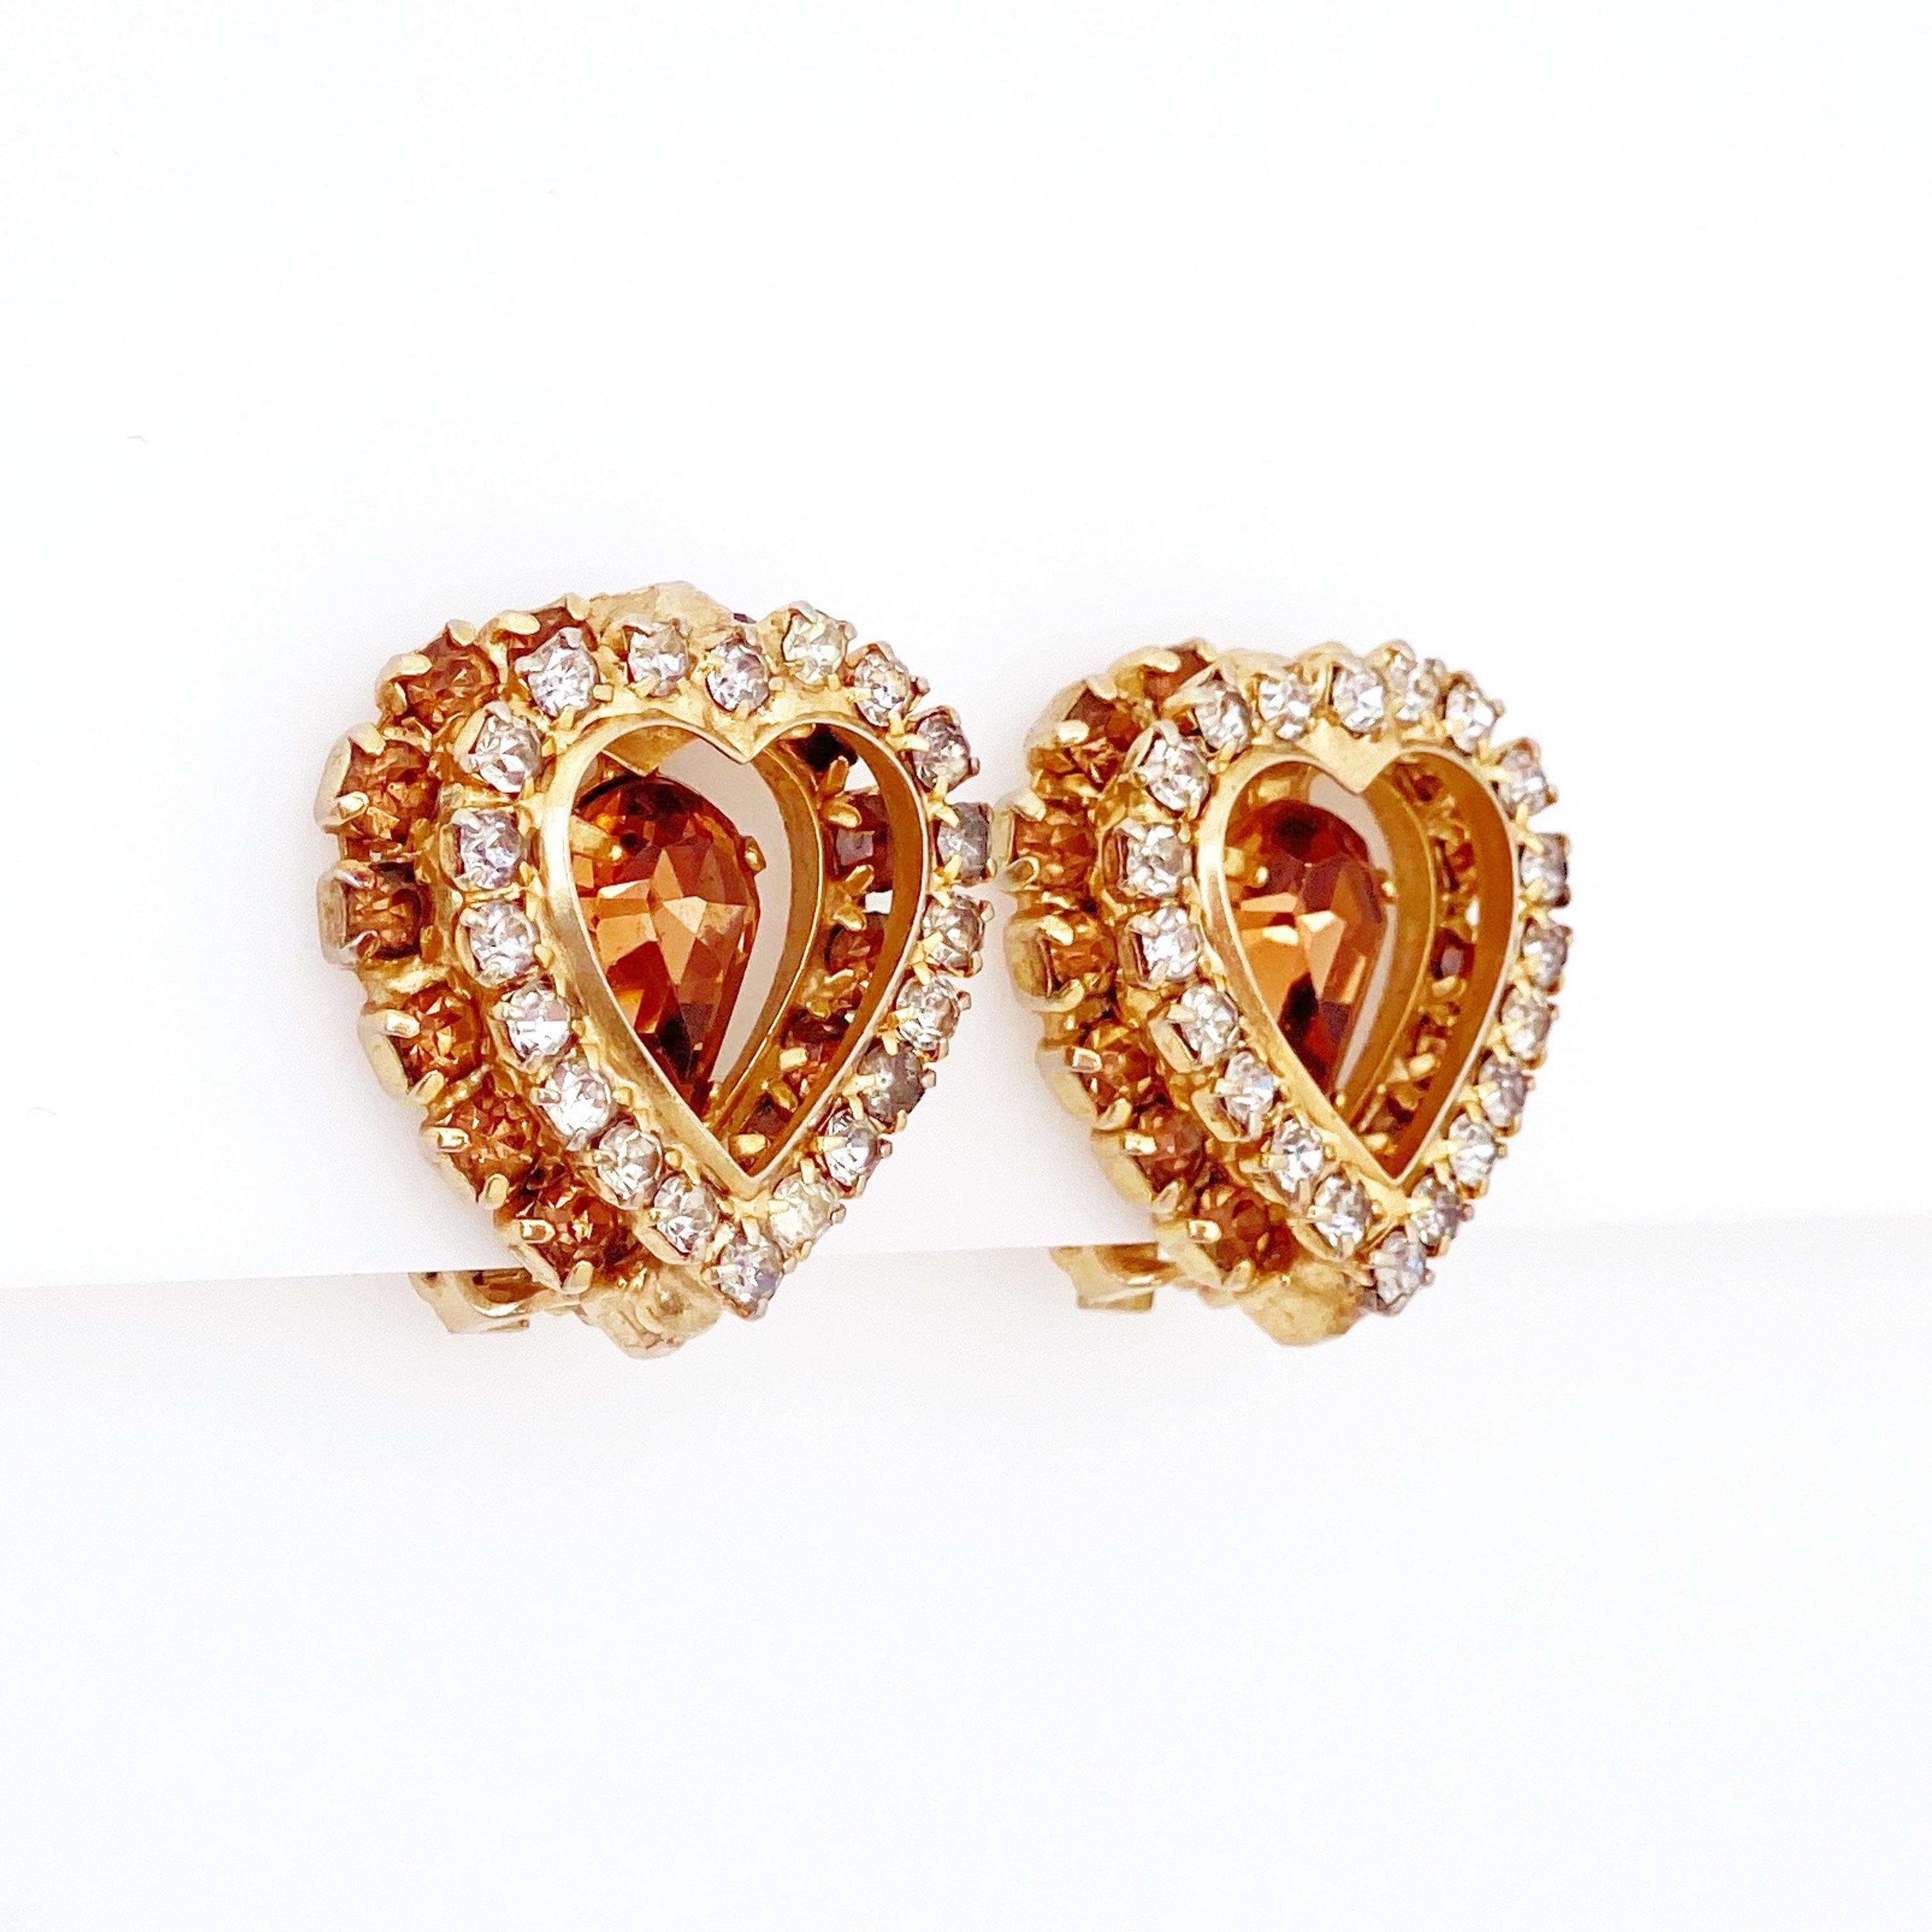 Modern Rhinestone Heart Earrings With Smoked Topaz Crystals By Joseph Warner, 1960s For Sale